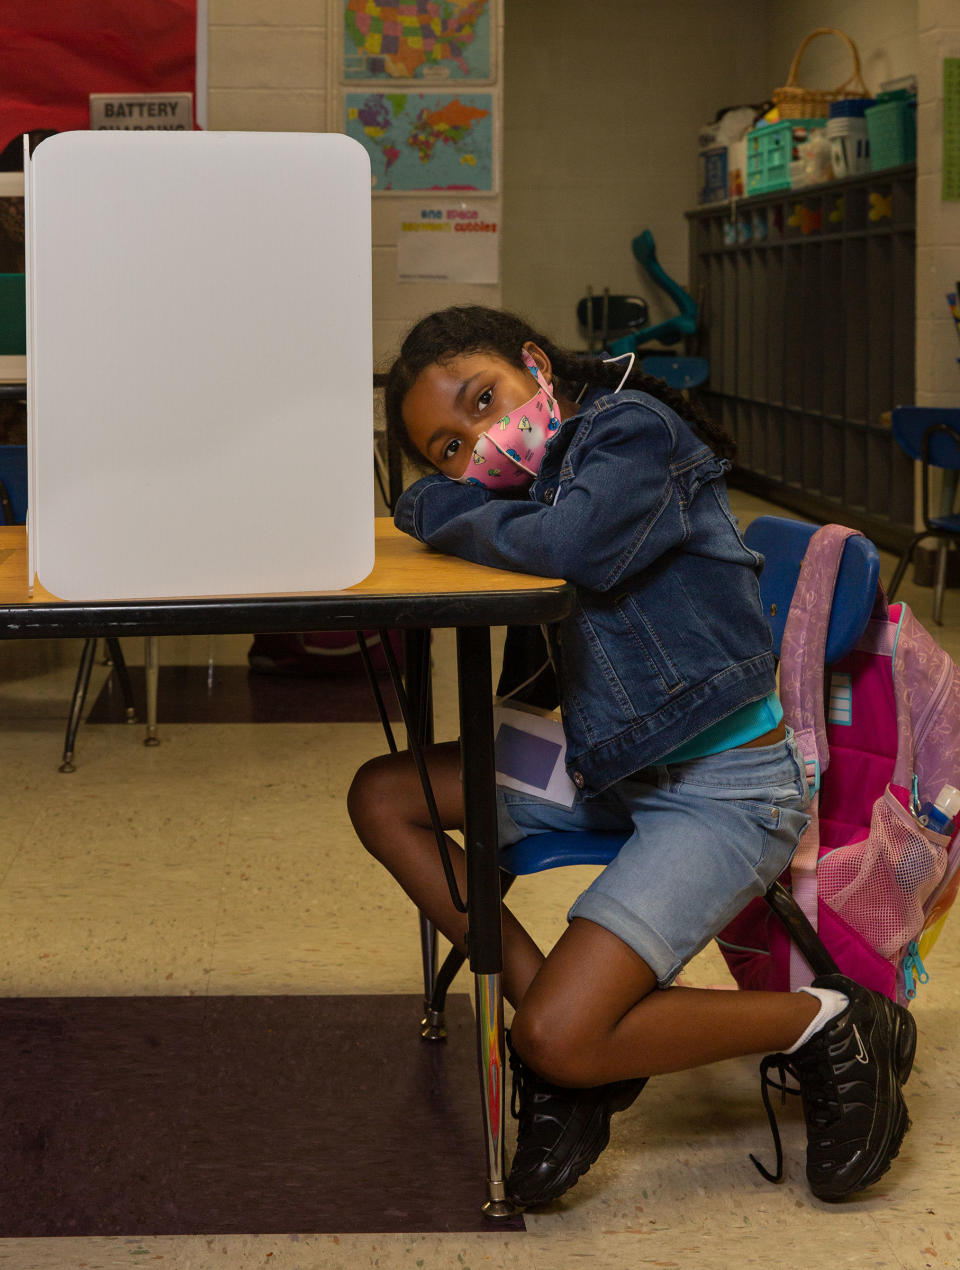 6-year-old Raziah Williams sits at her work station at Wesley Elementary | Gillian Laub for TIME